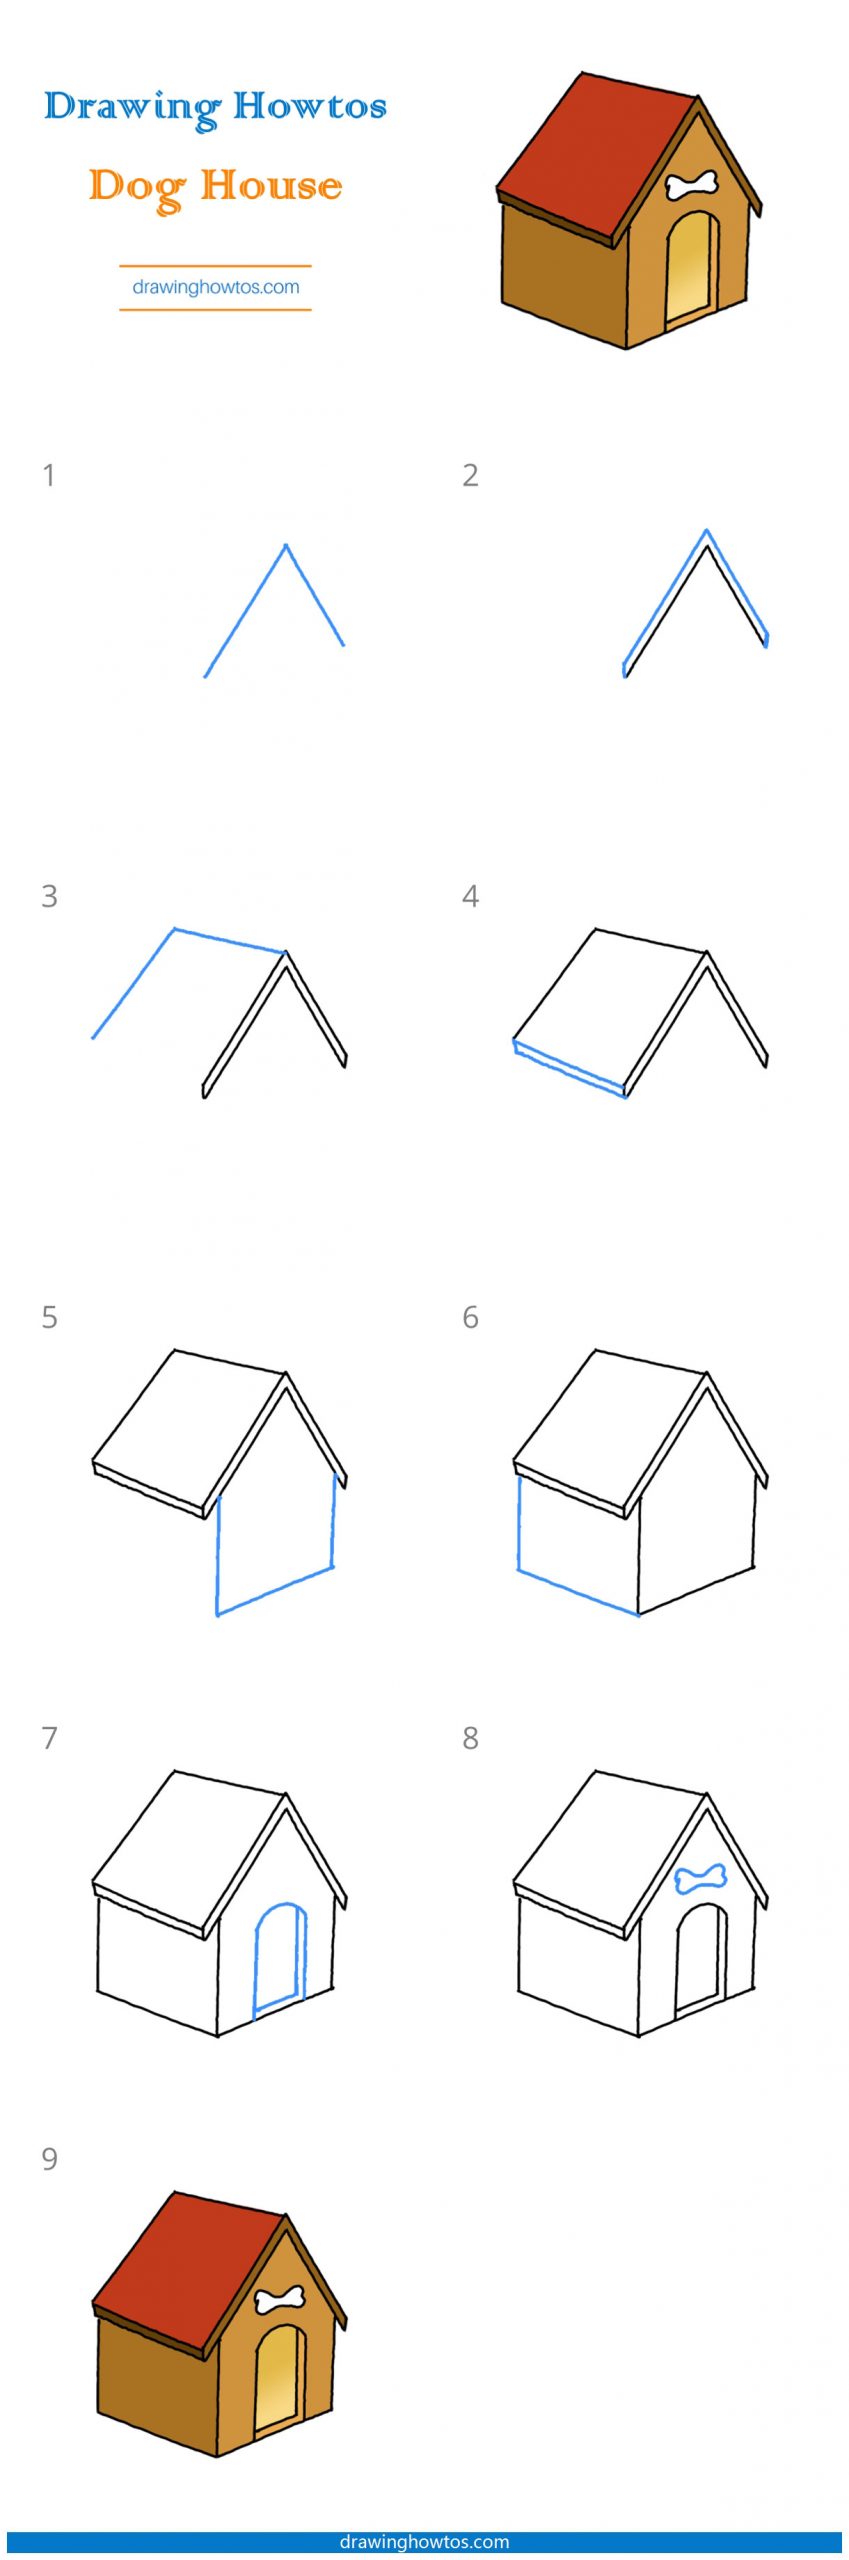 How to Draw a Dog House Step by Step